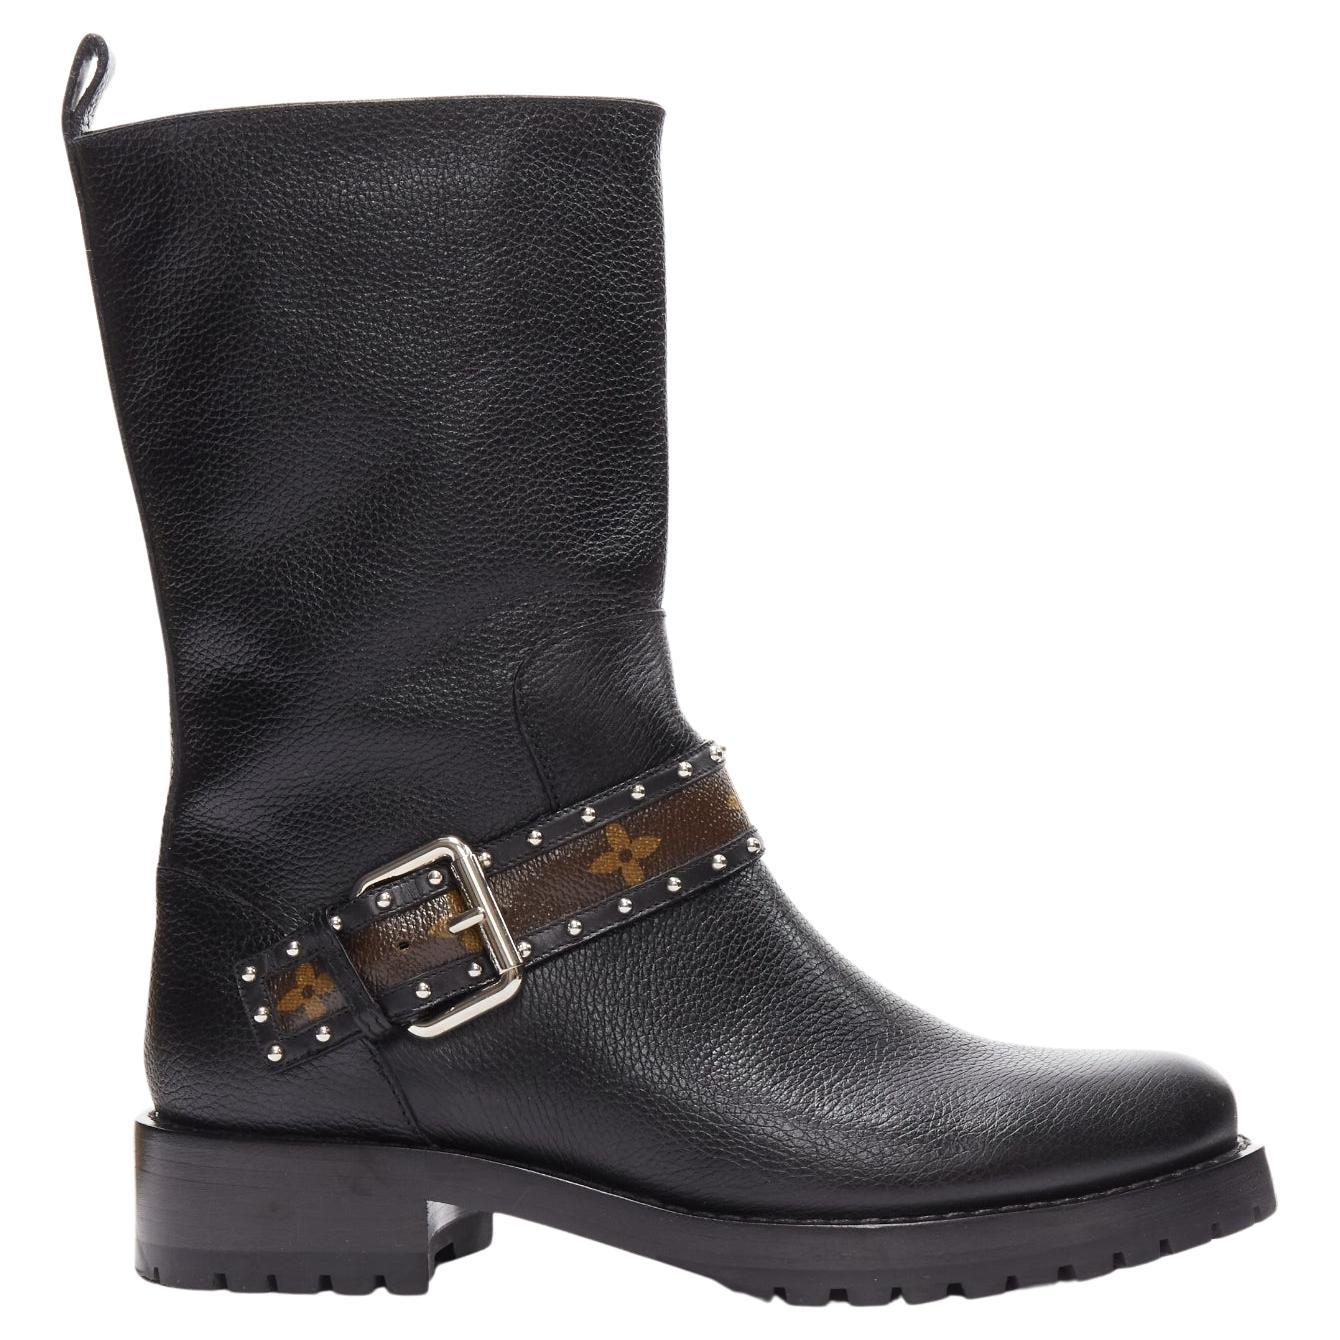 LOUIS VUITTON LV monogram top strap pull on motorcycle boots EU37 For Sale